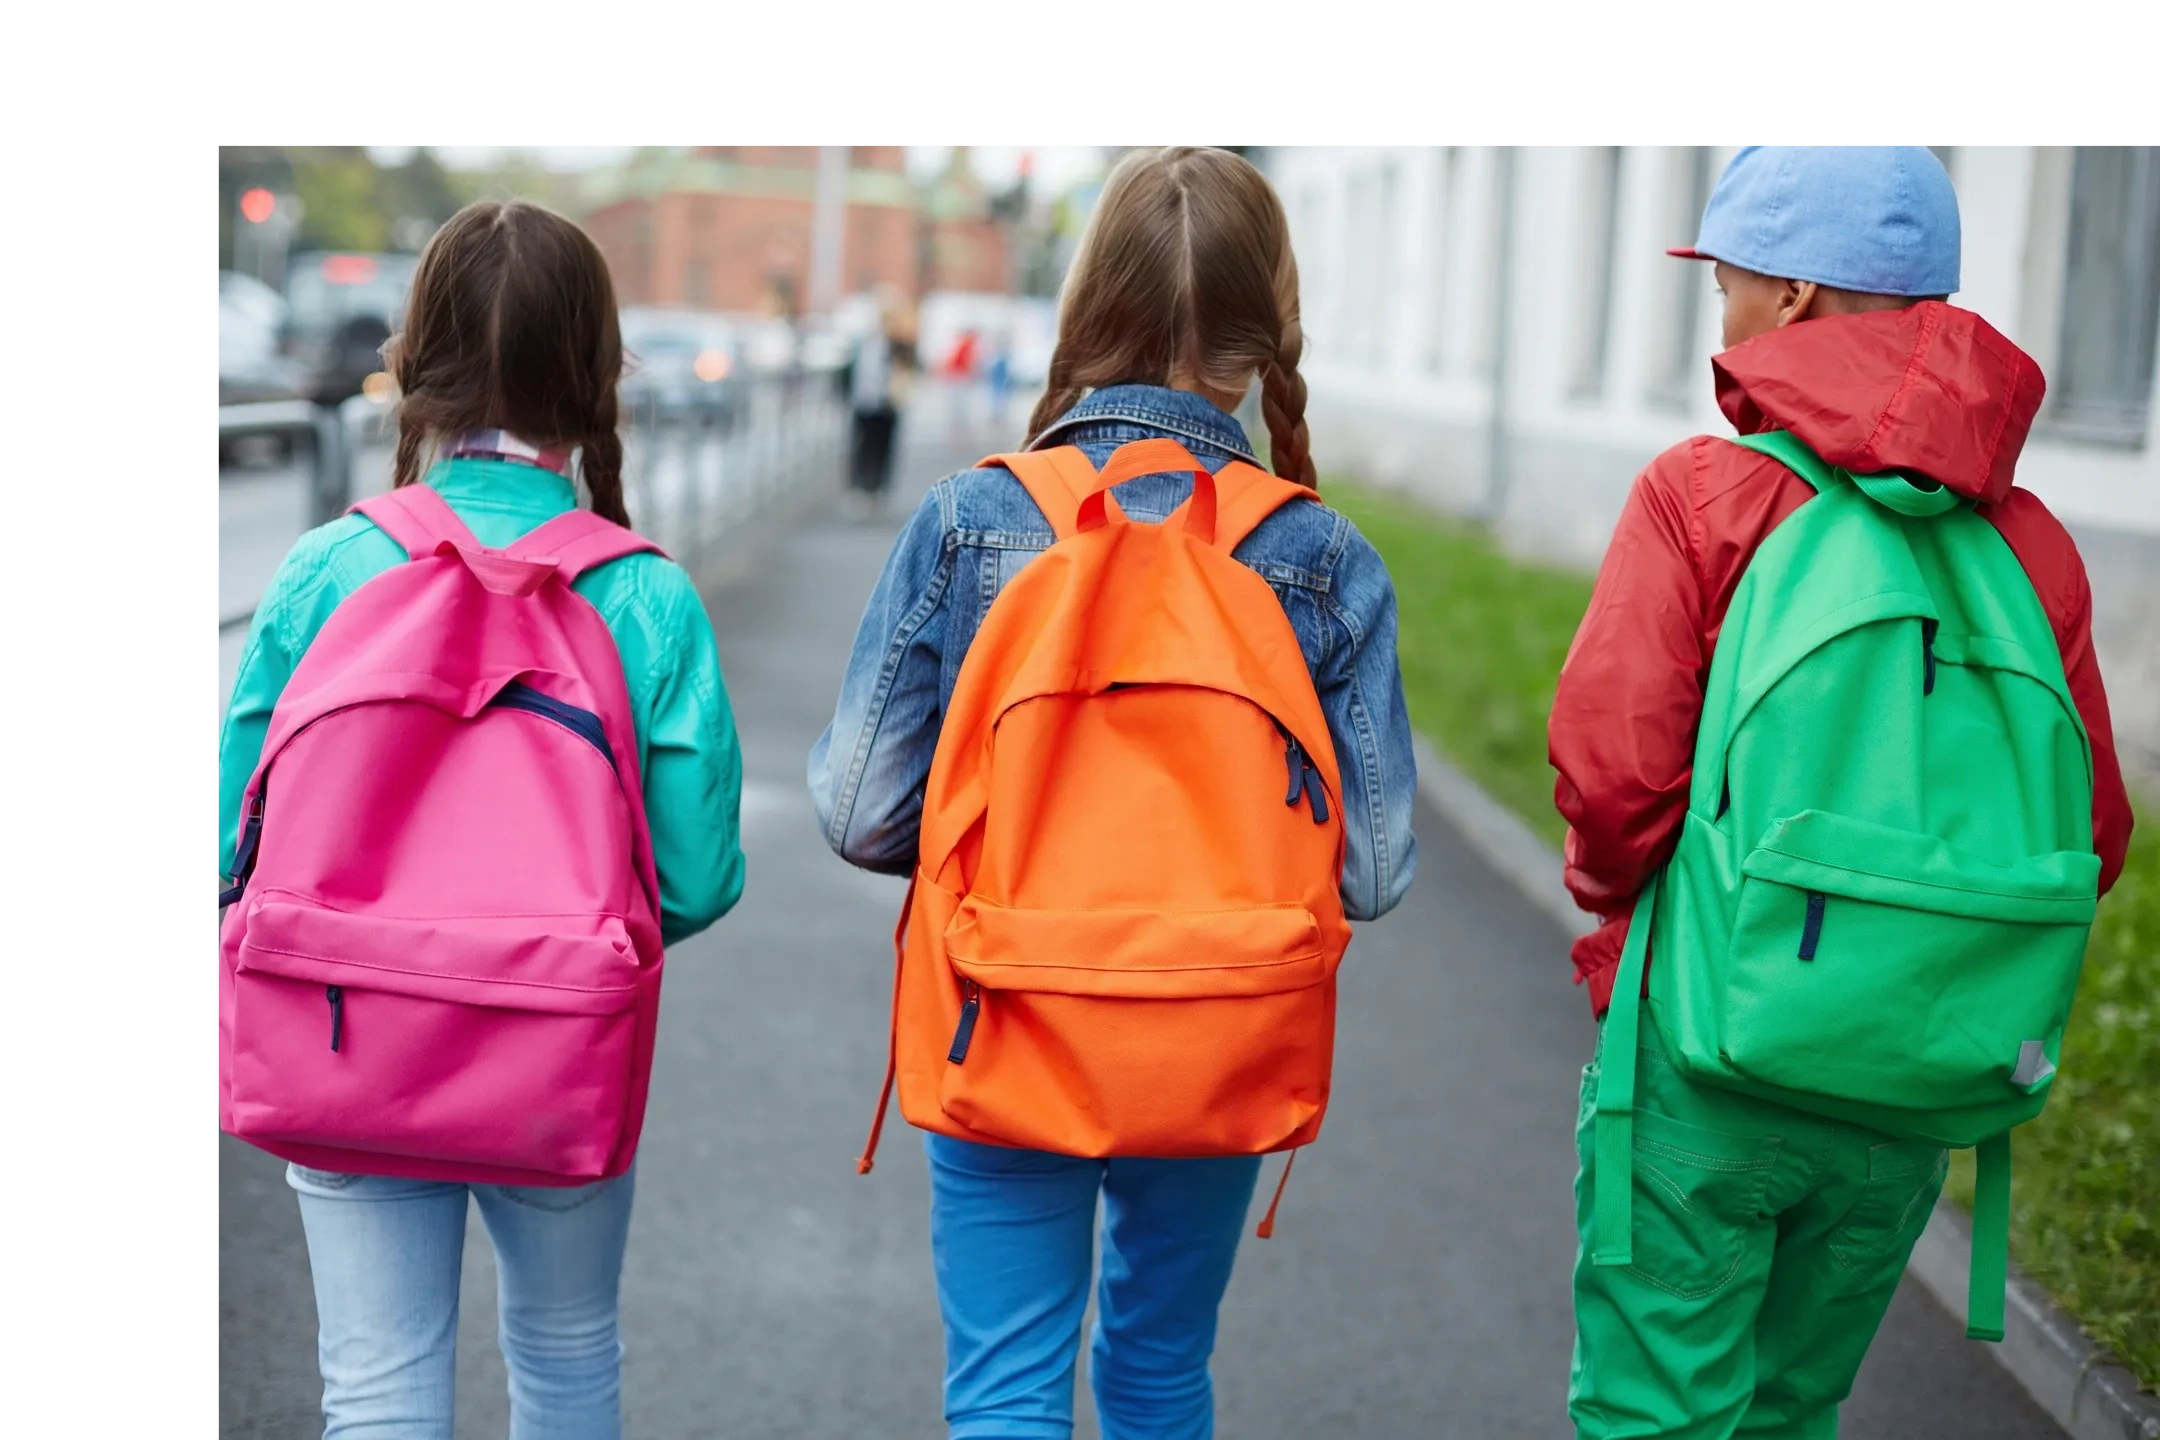 Girl Packing School Bag To School PNG Hd Transparent Image And